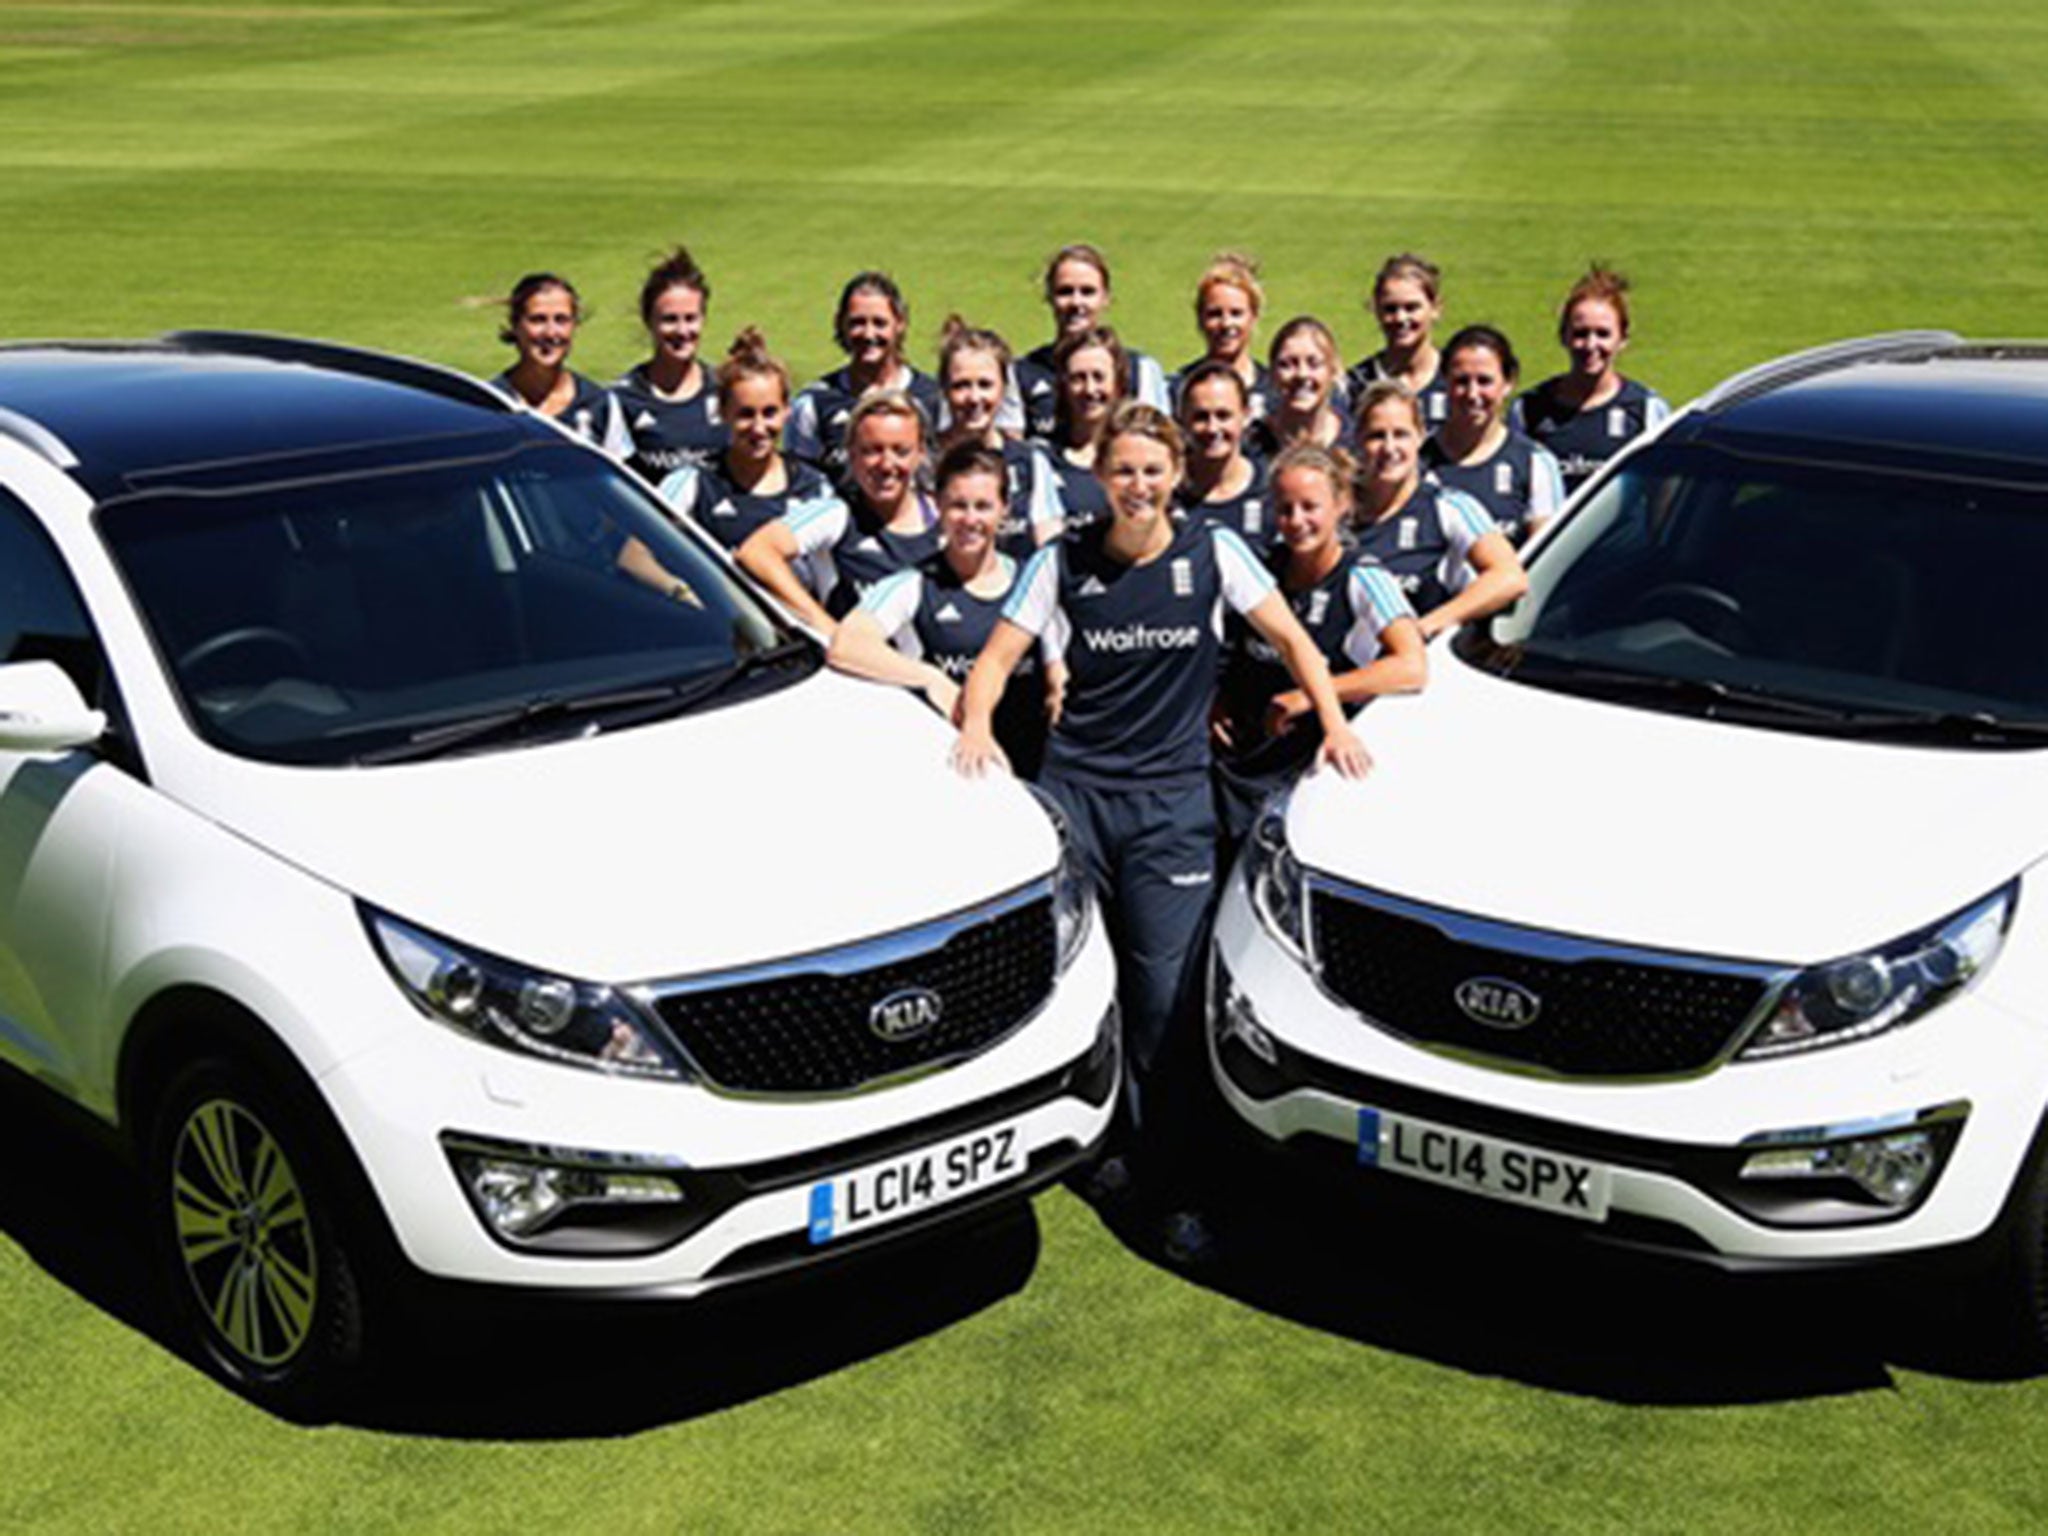 The deal represents the first ever standalone commercial arrangement for the England women’s team